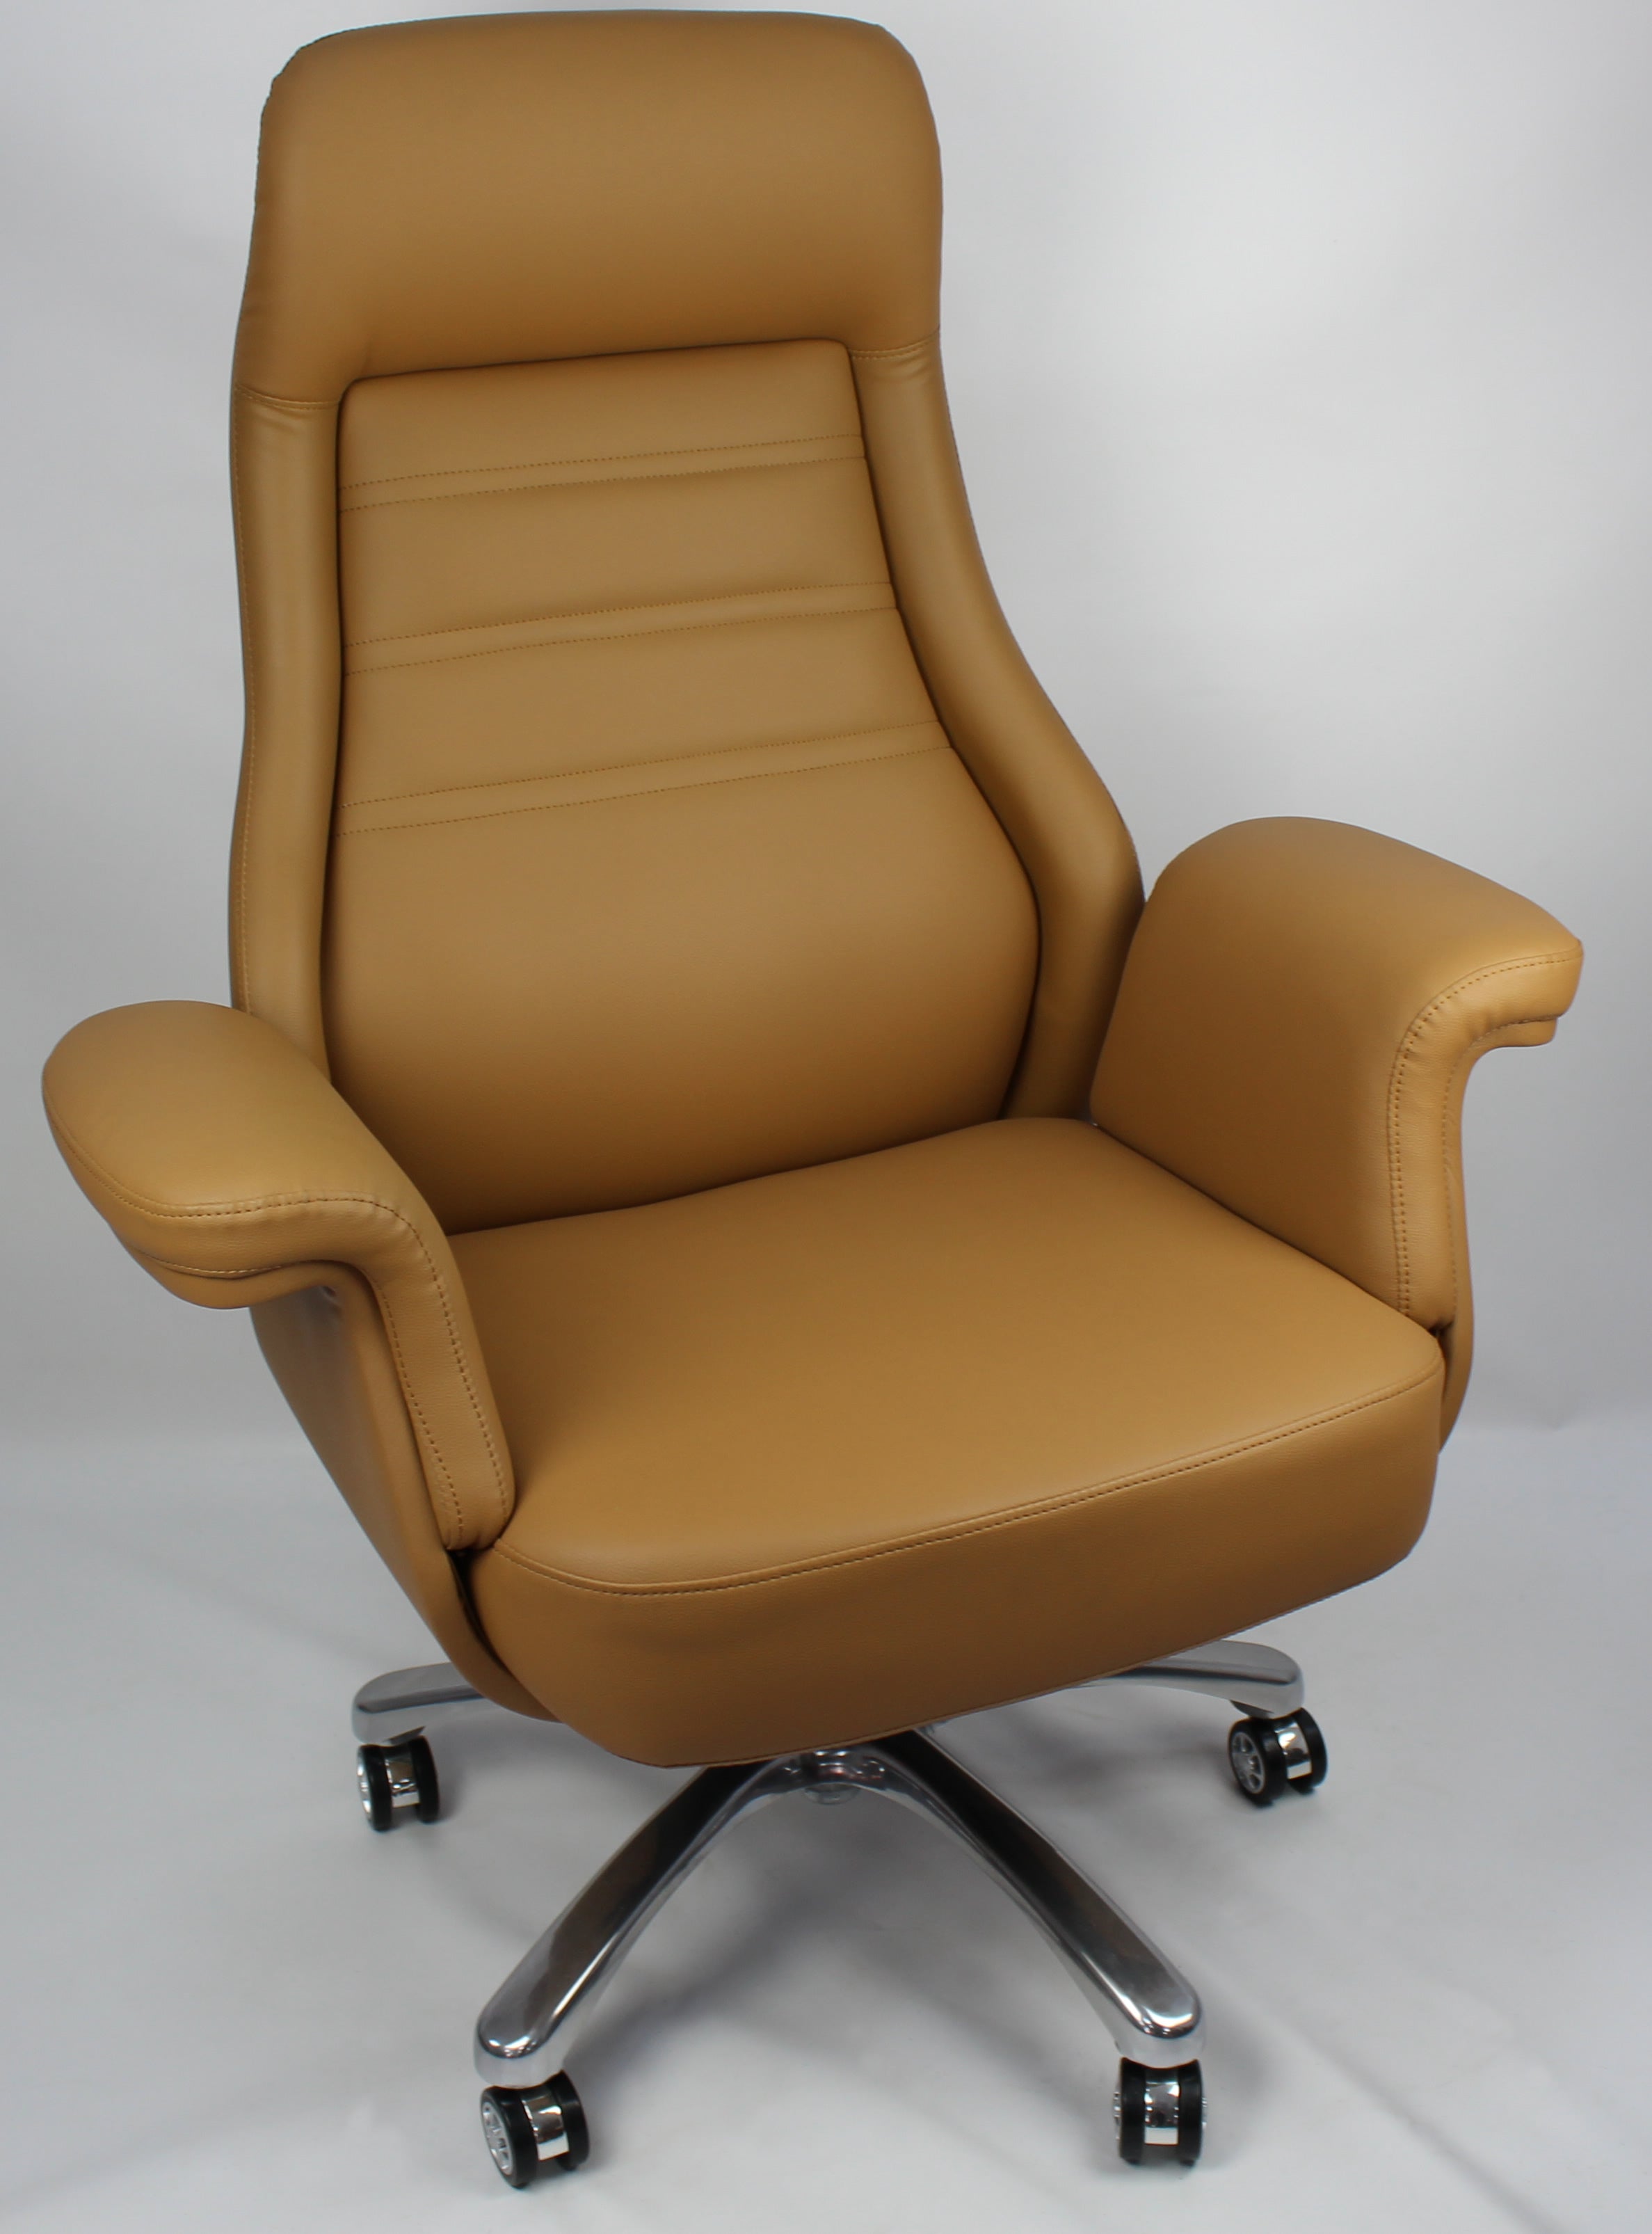 Beige Leather Executive Office Chair - DH-090 Near Me